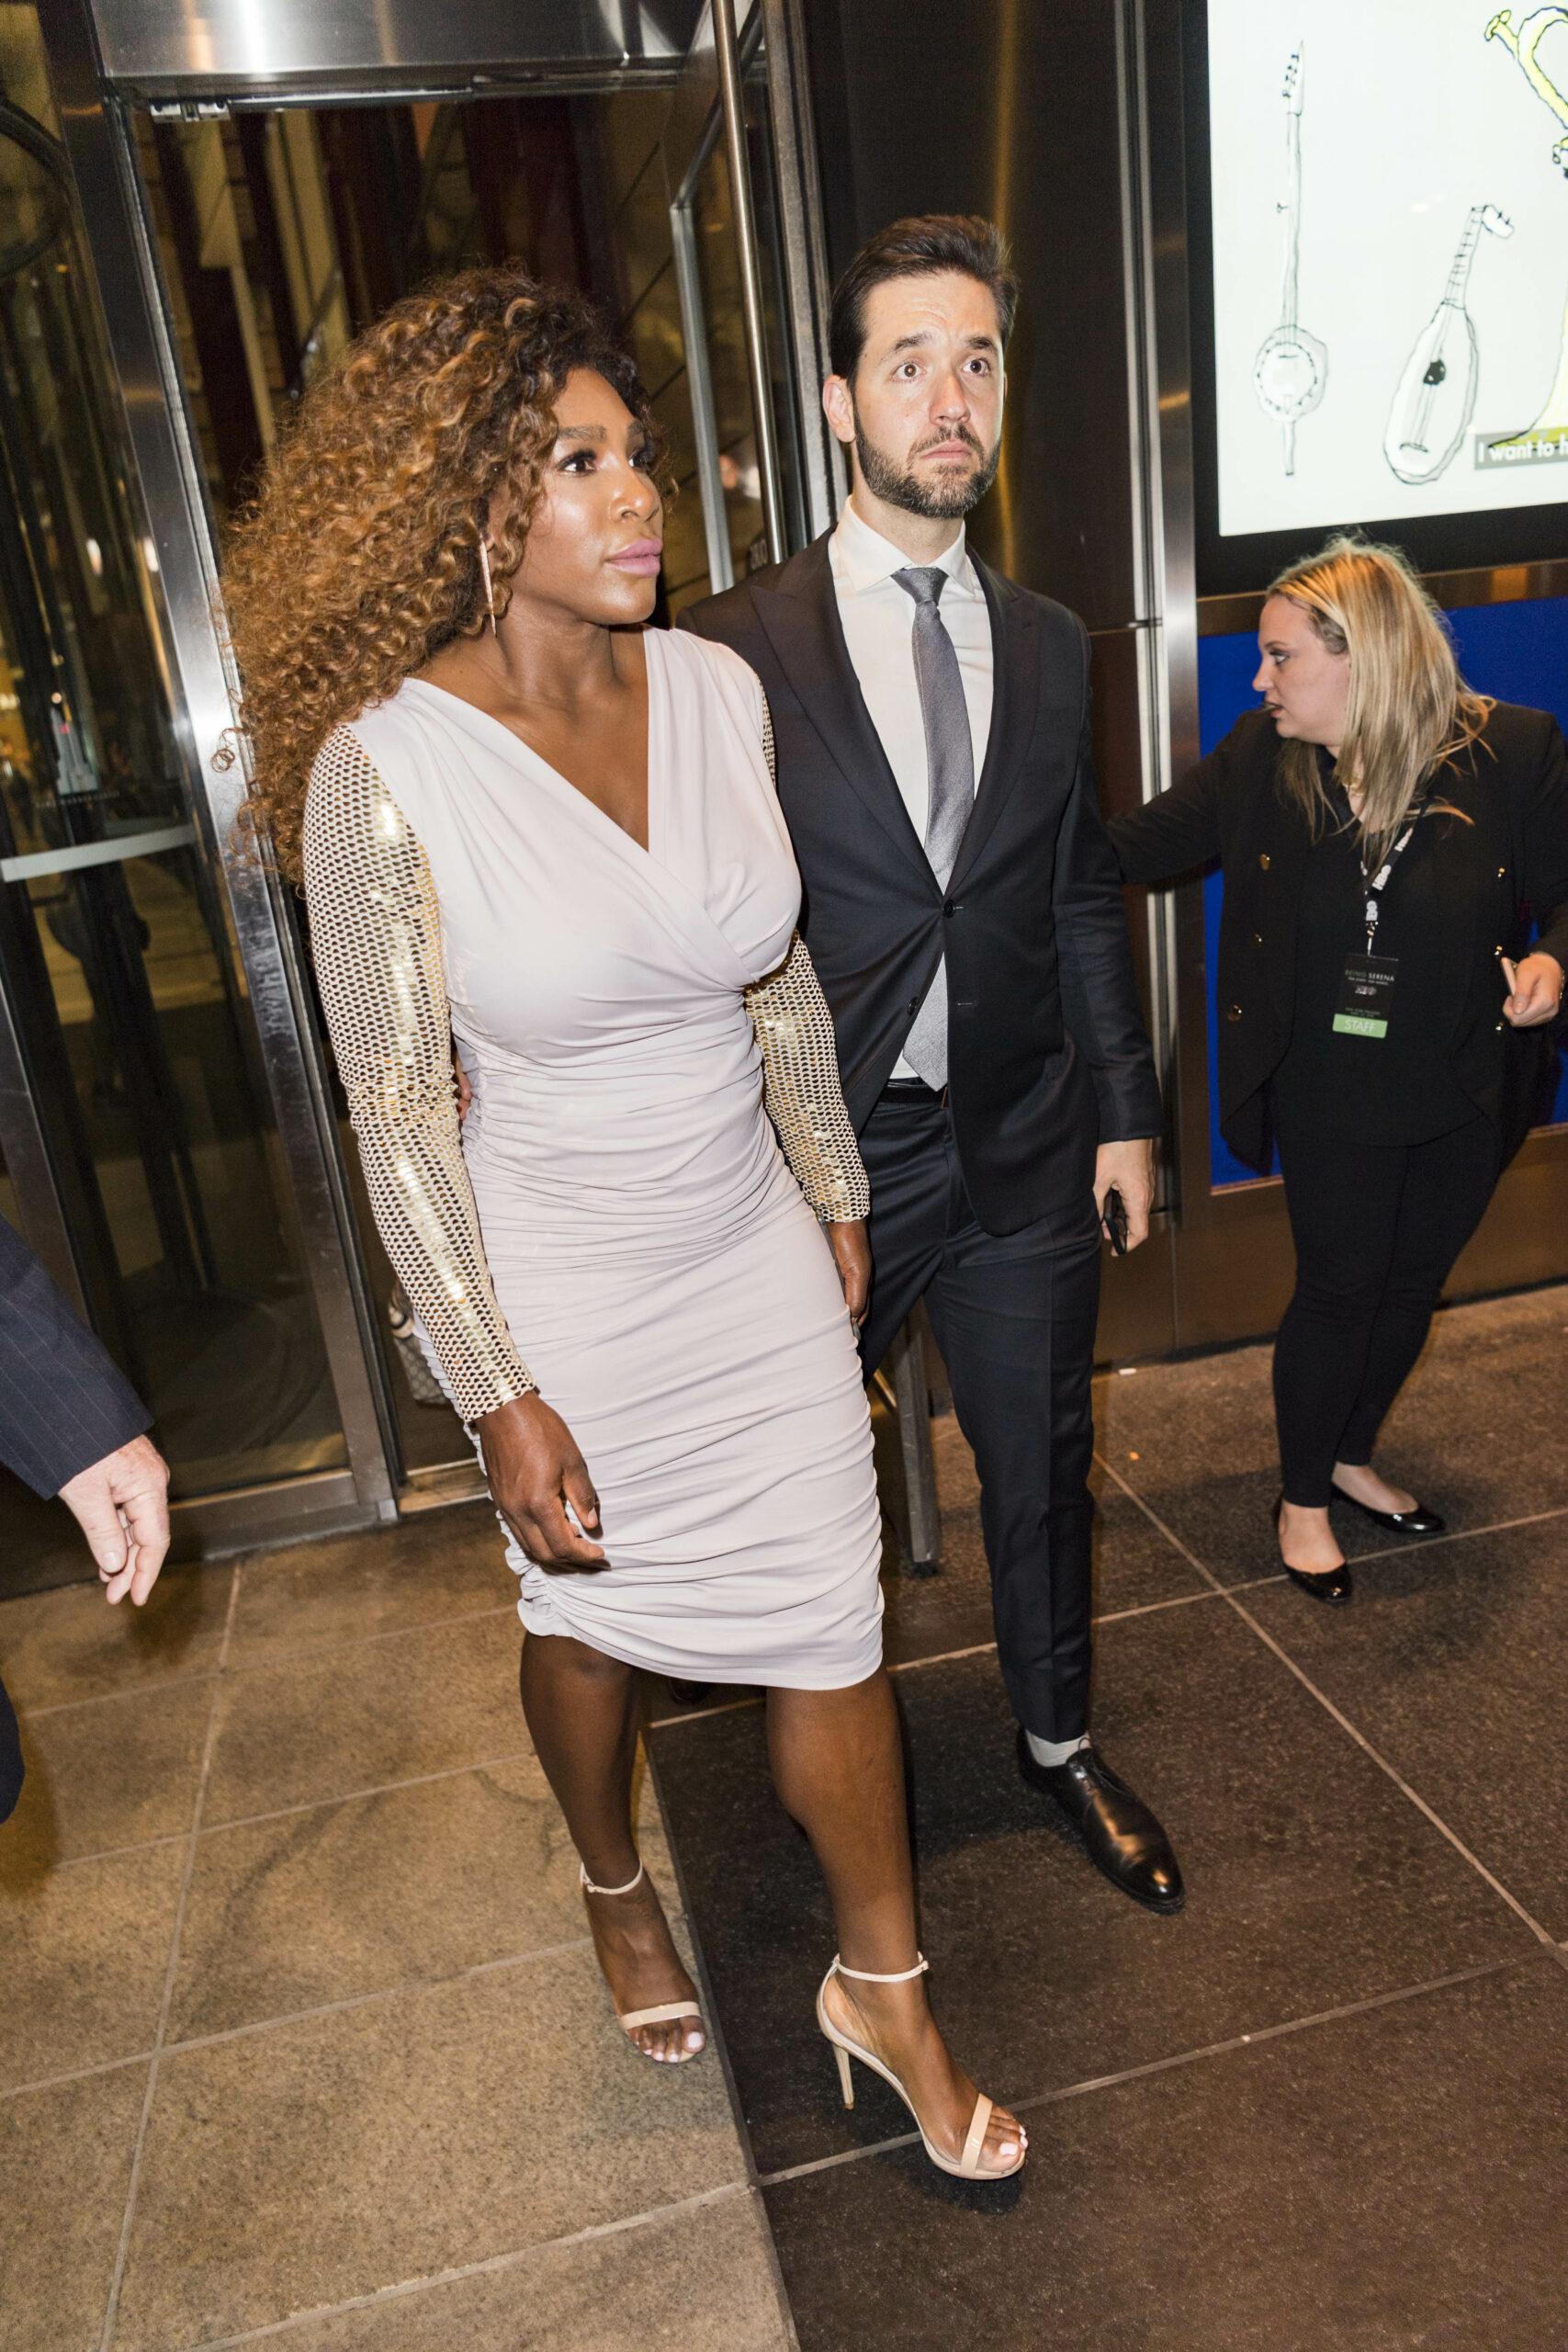 Serena Williams leaving with husband Alexis while previously grandma took her daughter back to the hotel